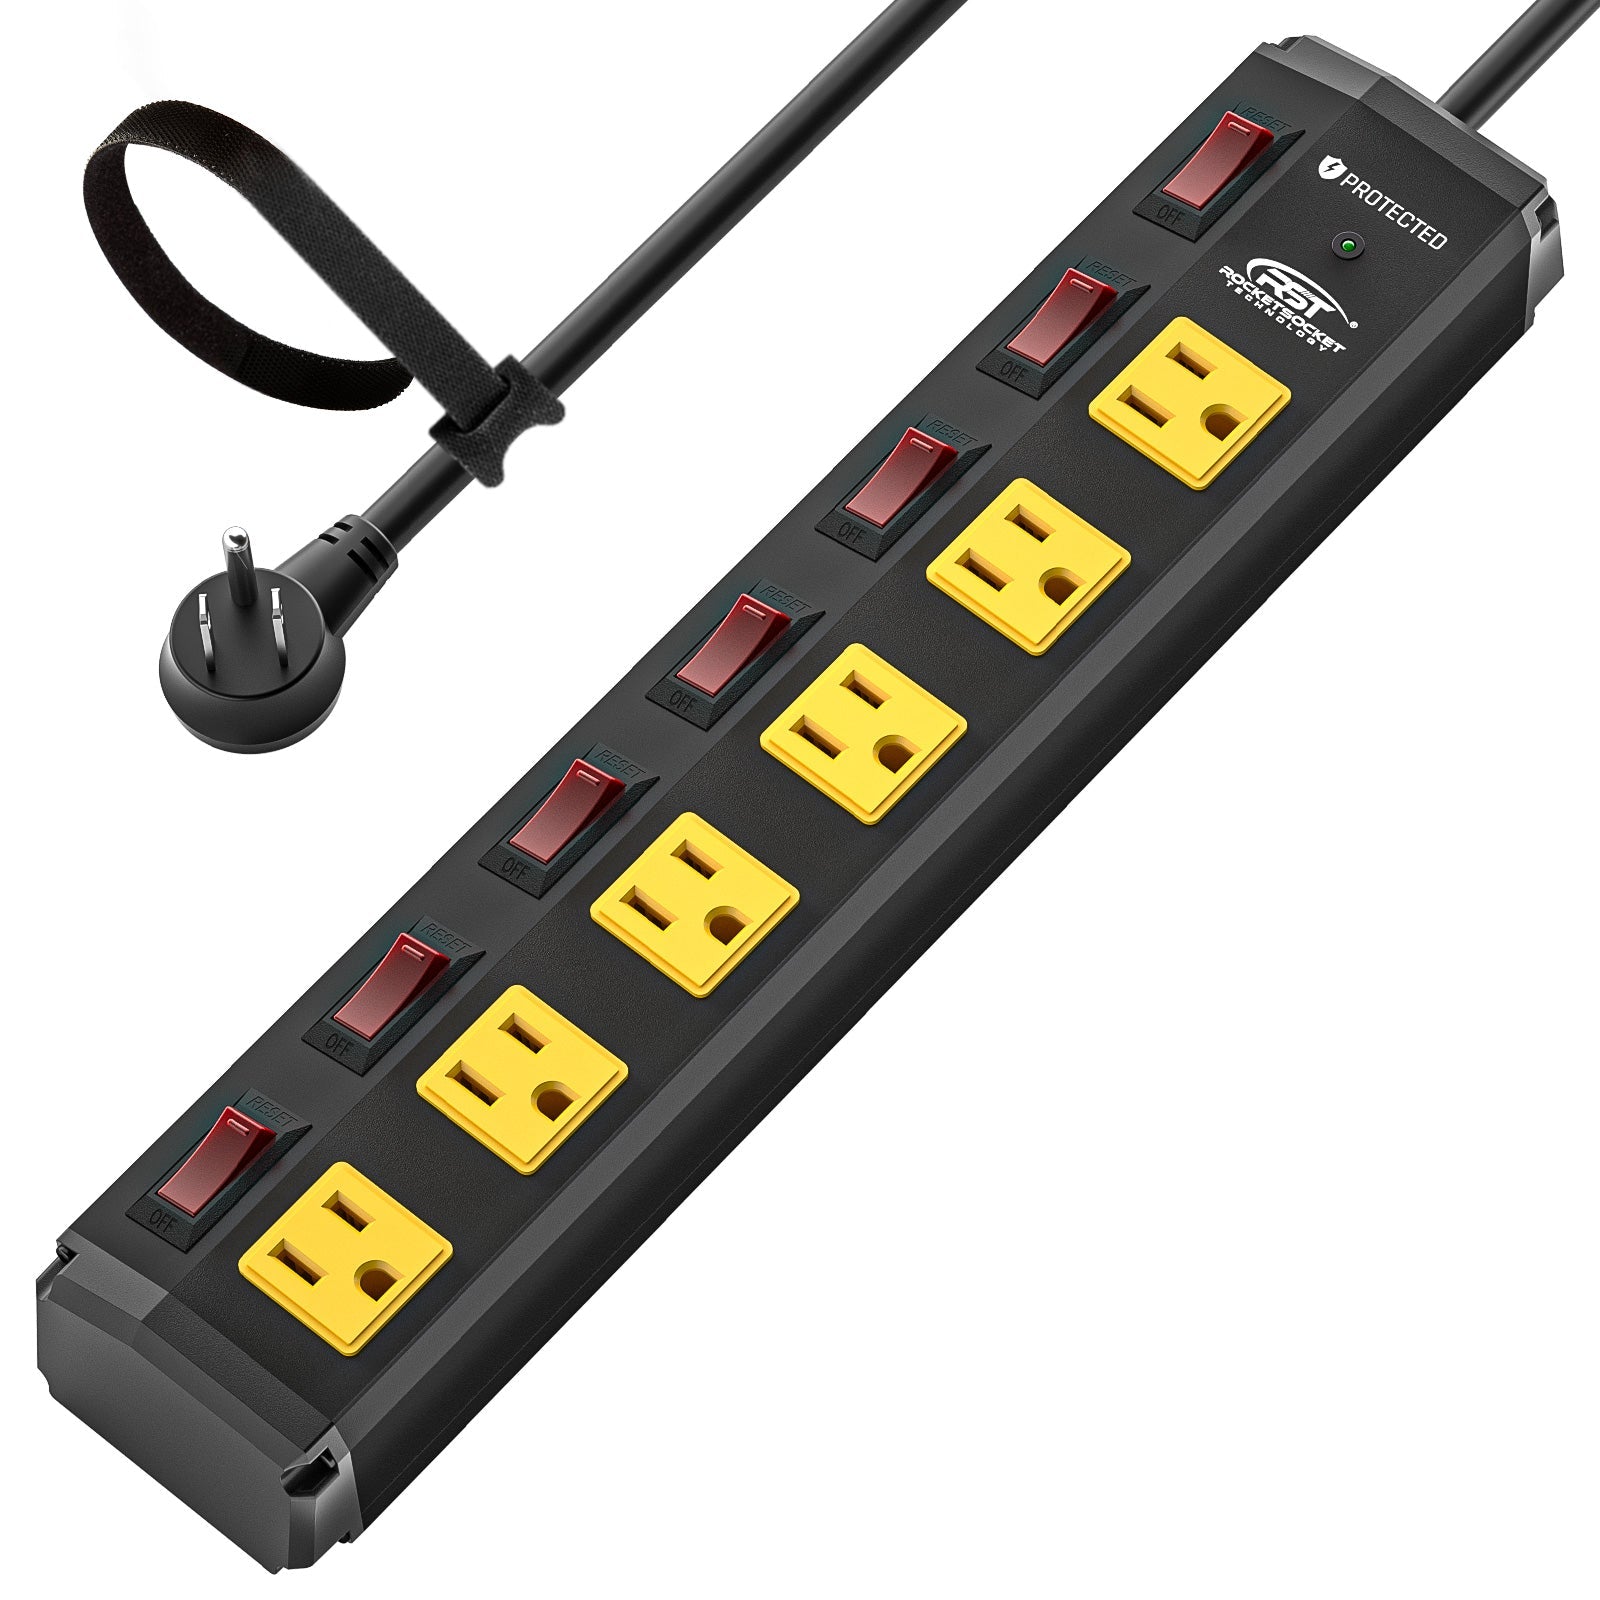 ROCKETSOCKETTECH power strip Yellow CRST 6-Outlets 6 ft. Heavy Duty Surge Protector Power Strip 15A